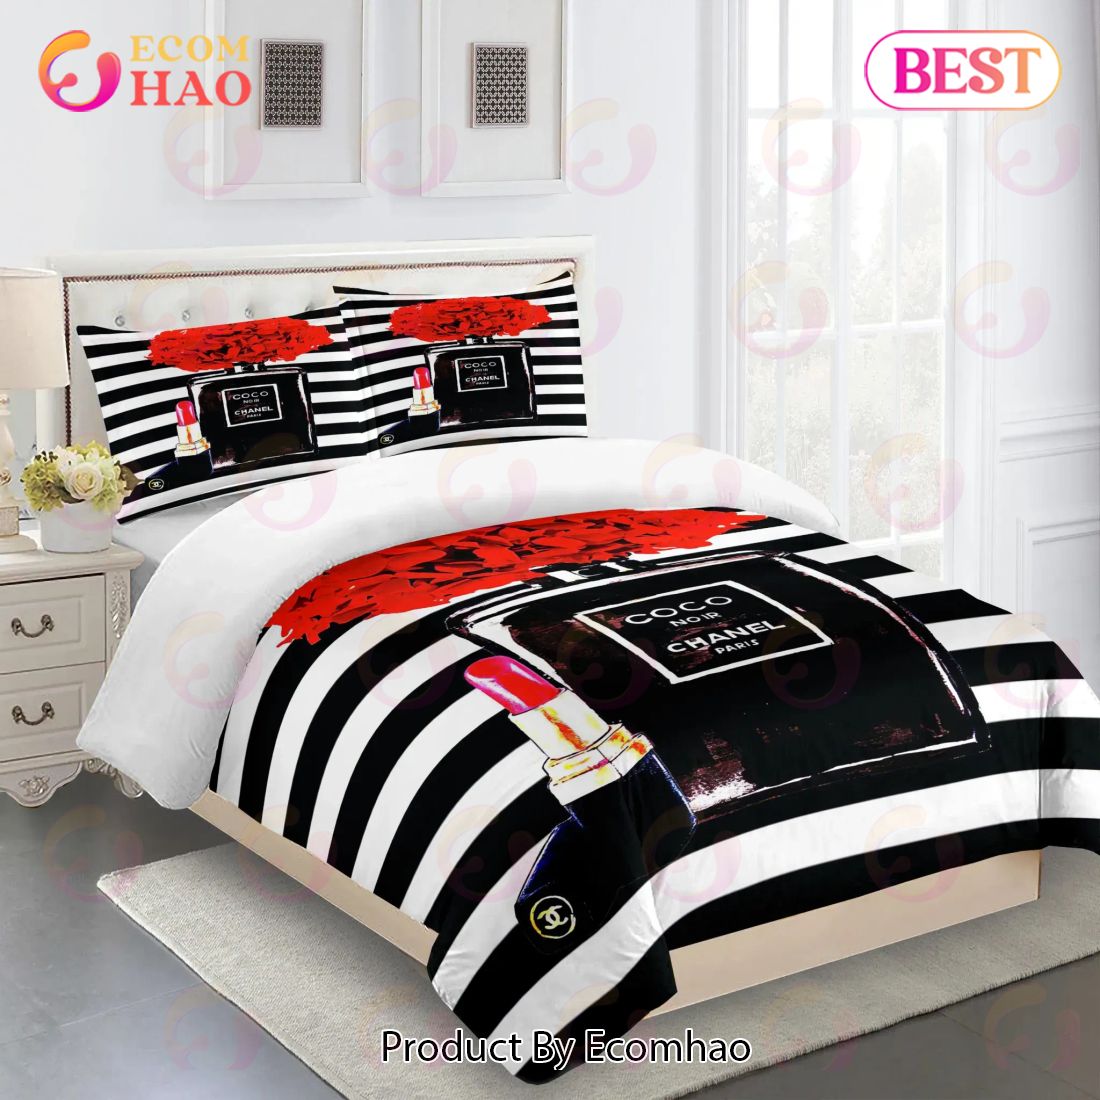 Chanel Coco Noir Paris Luxury Brand Premium Bedding Set For Bedroom Luxury  Bedspread Duvet Cover Set With Pillowcases Home Decoration - Ecomhao Store